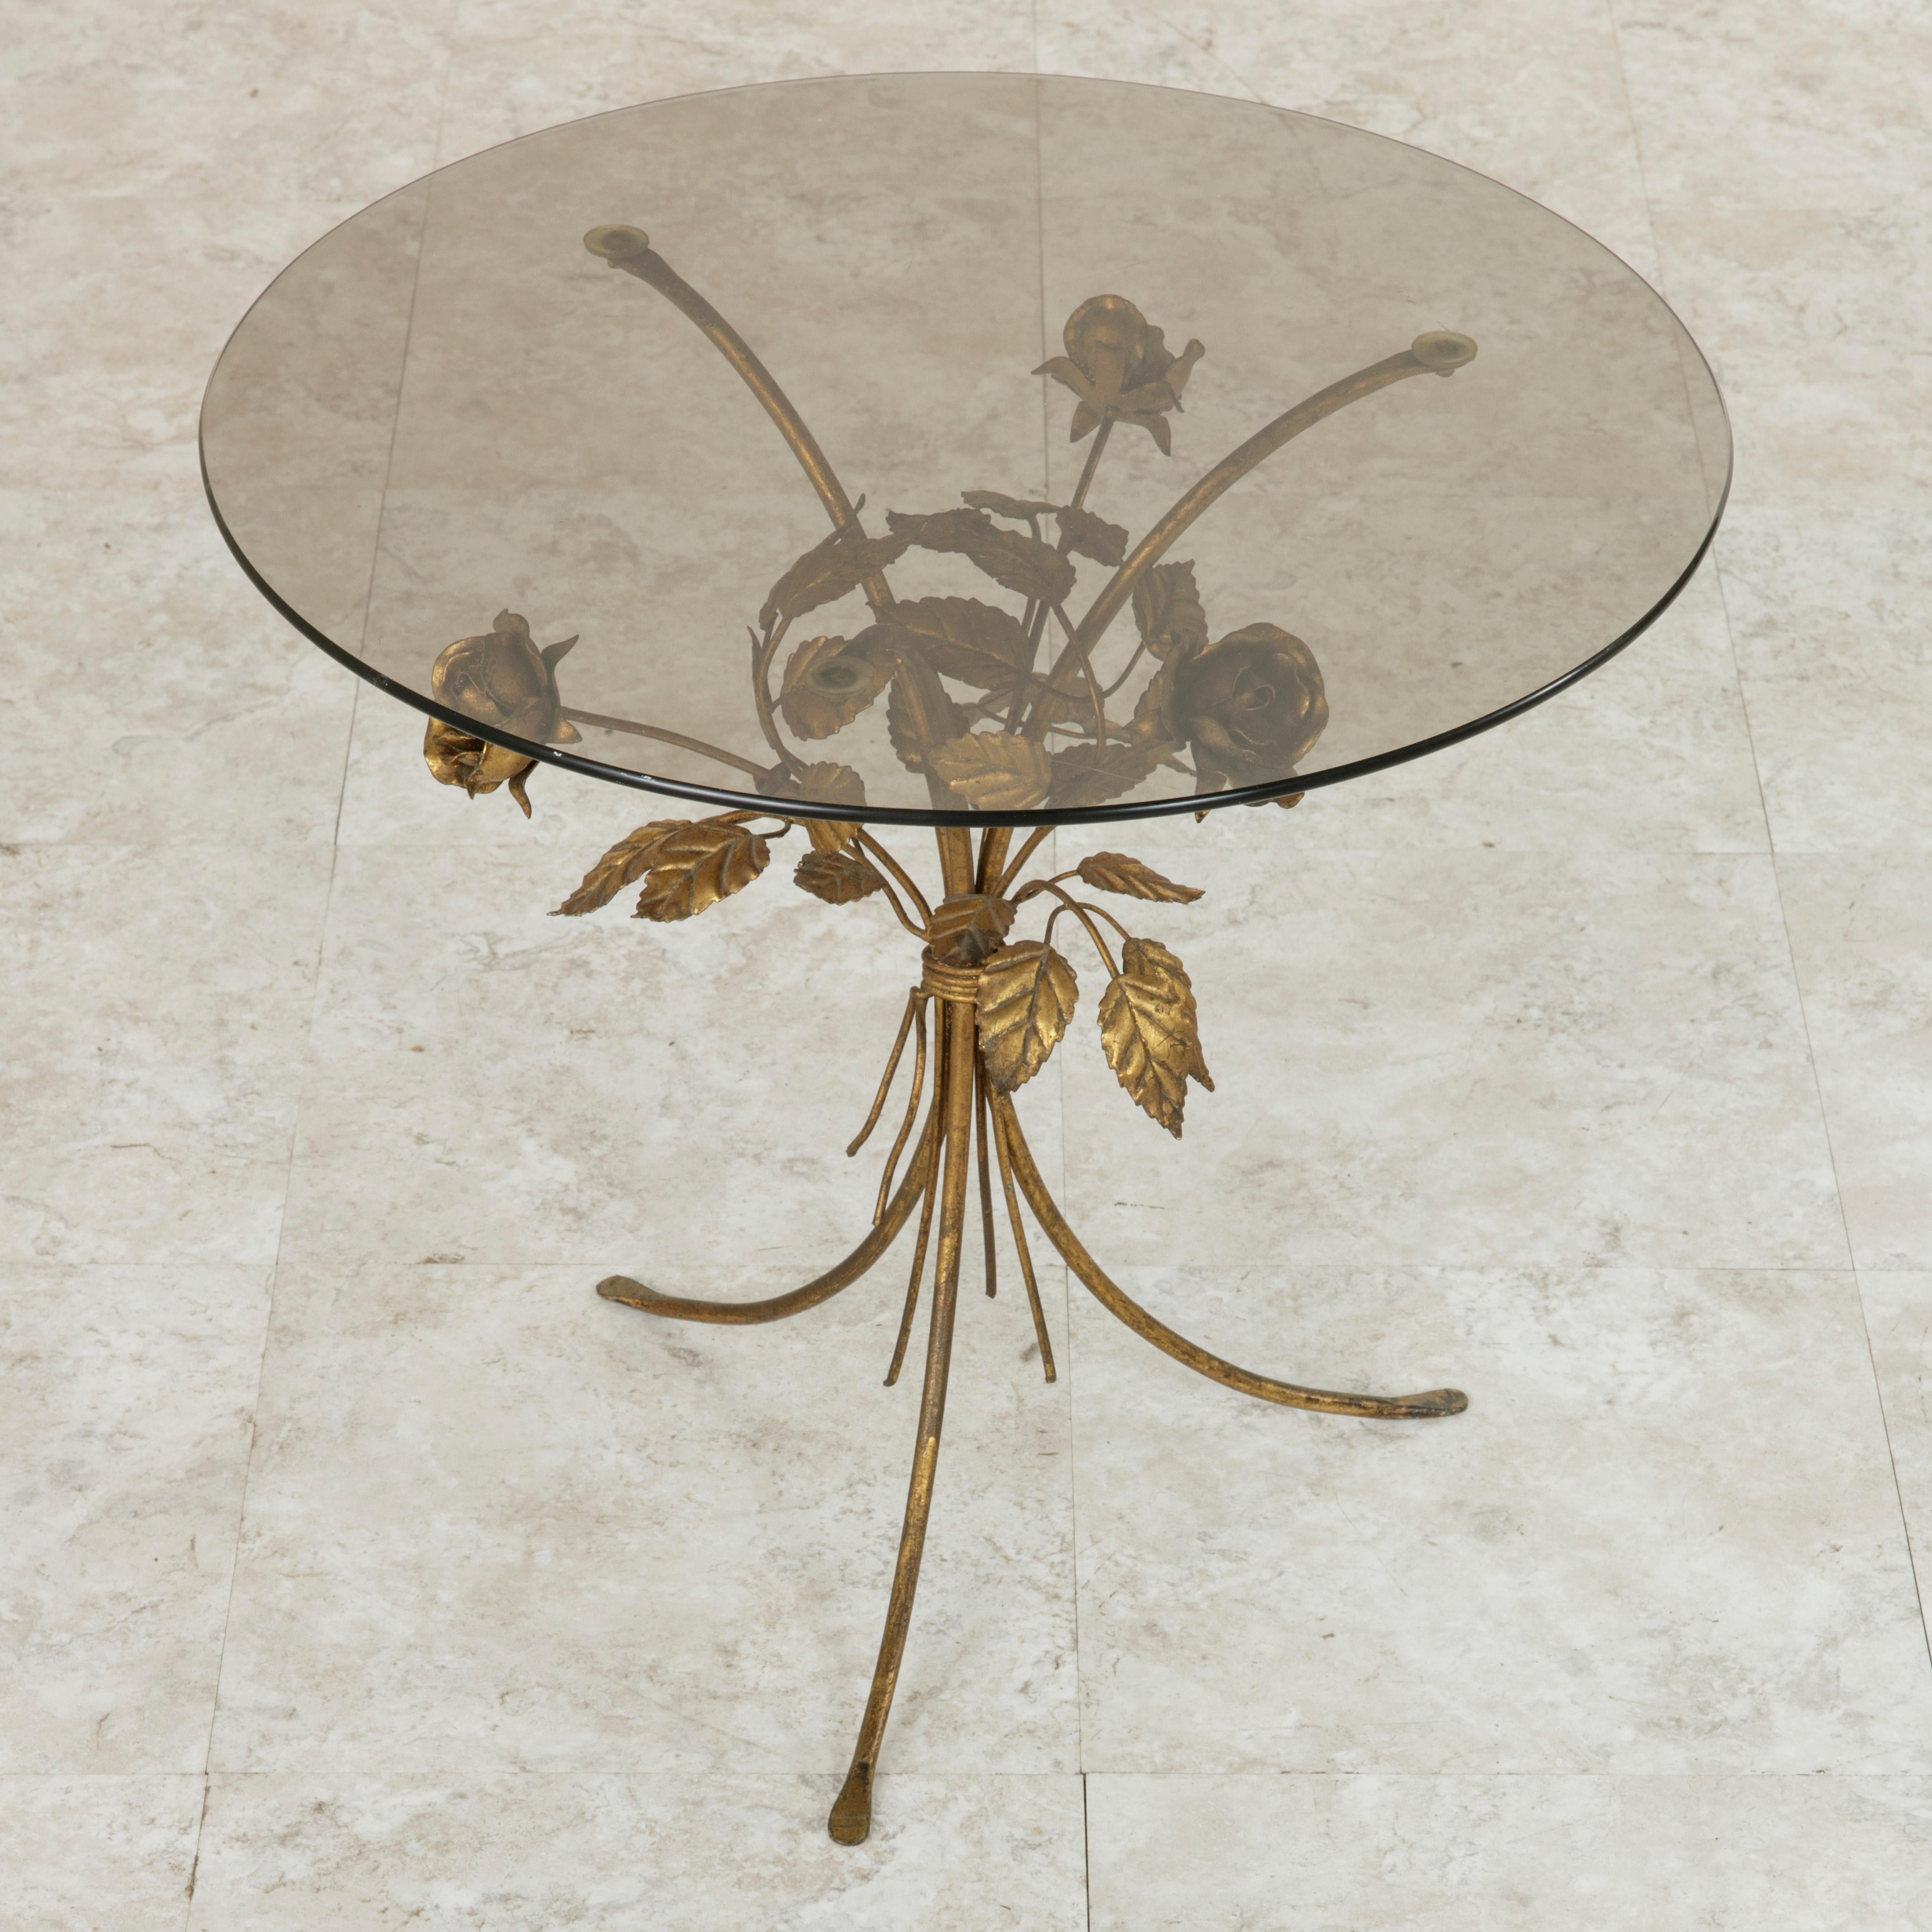 This small scale midcentury Italian gilt metal side table features a bound bouquet of roses and leaves surrounding the three legs of its base. A round smoked glass top completes the look. With its 18-inch height and 20-inch diameter, this piece